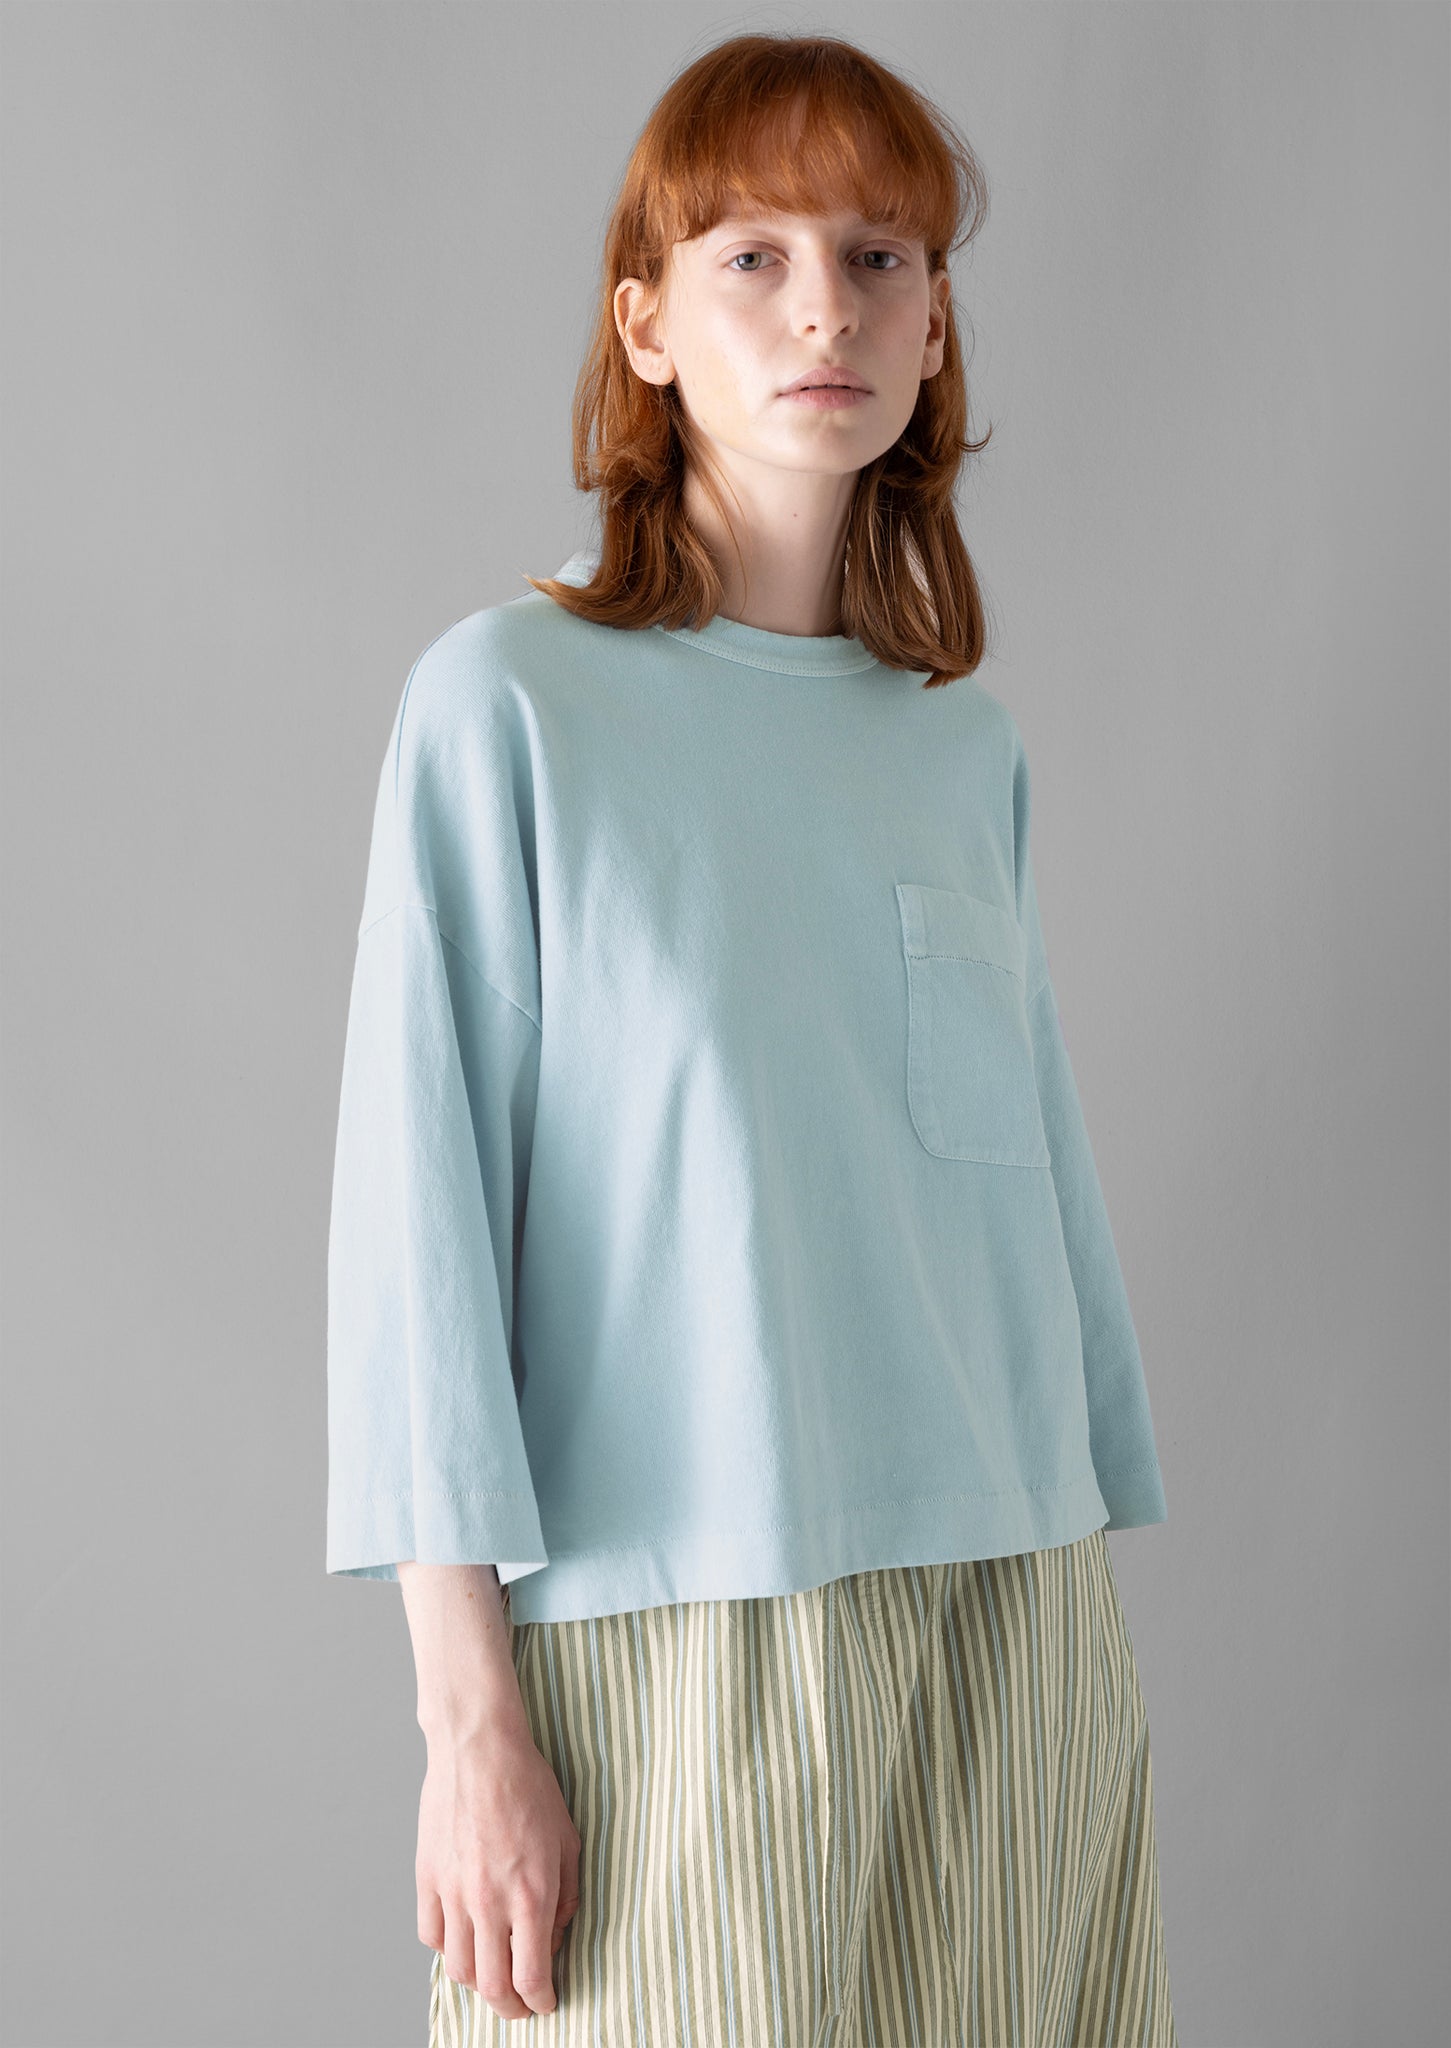 Mineral Dyed Organic Cotton Boxy Tee | Sky Blue